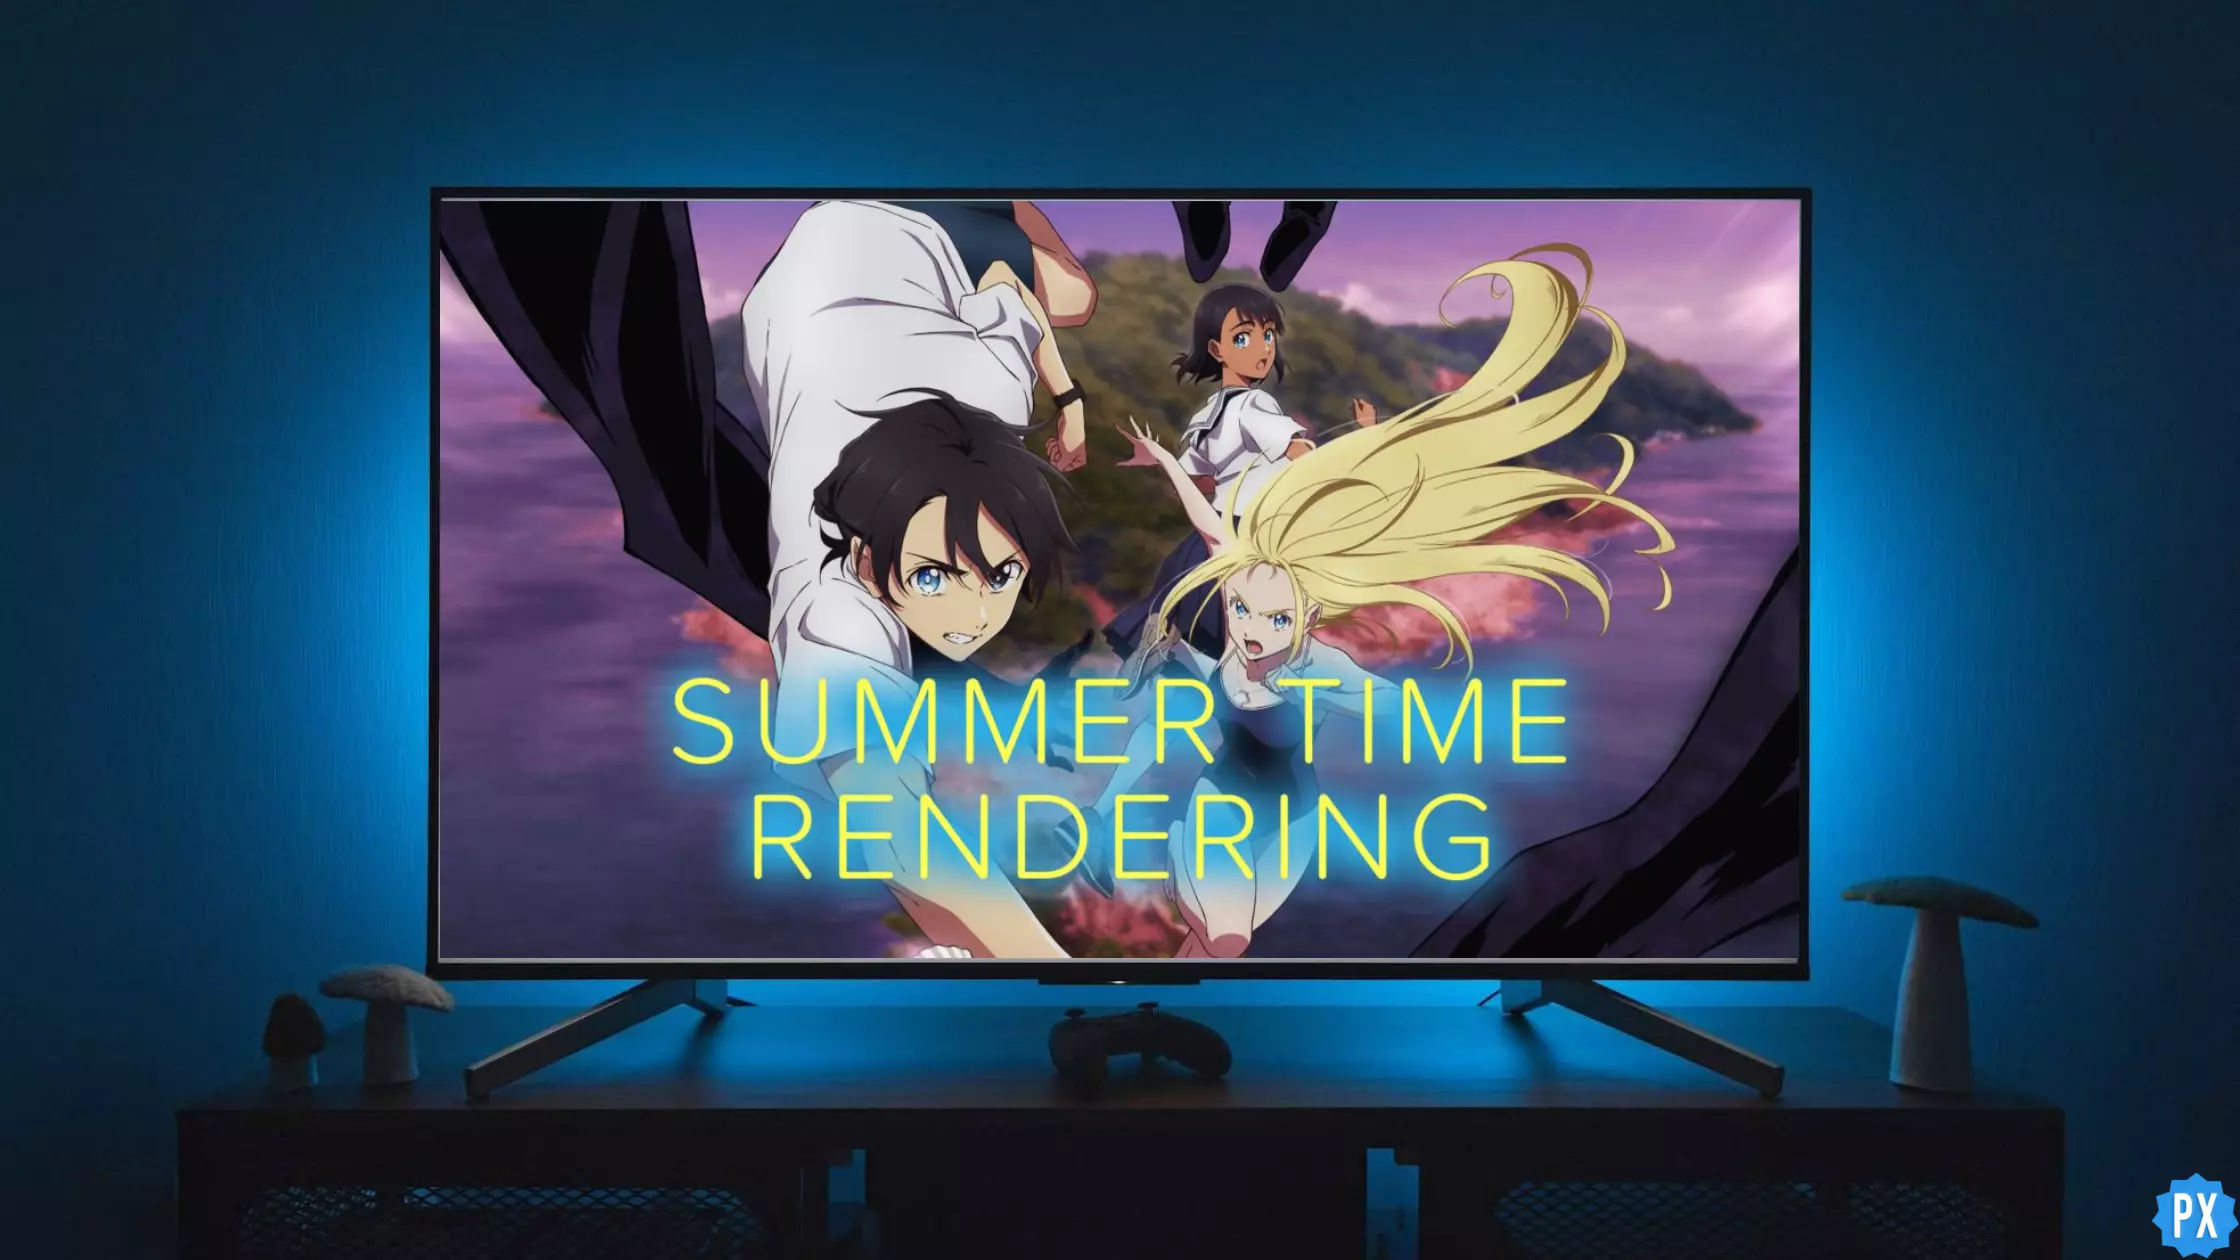 Summer Time Rendering Episode 10 Release Date and Time on Disney Plus -  GameRevolution